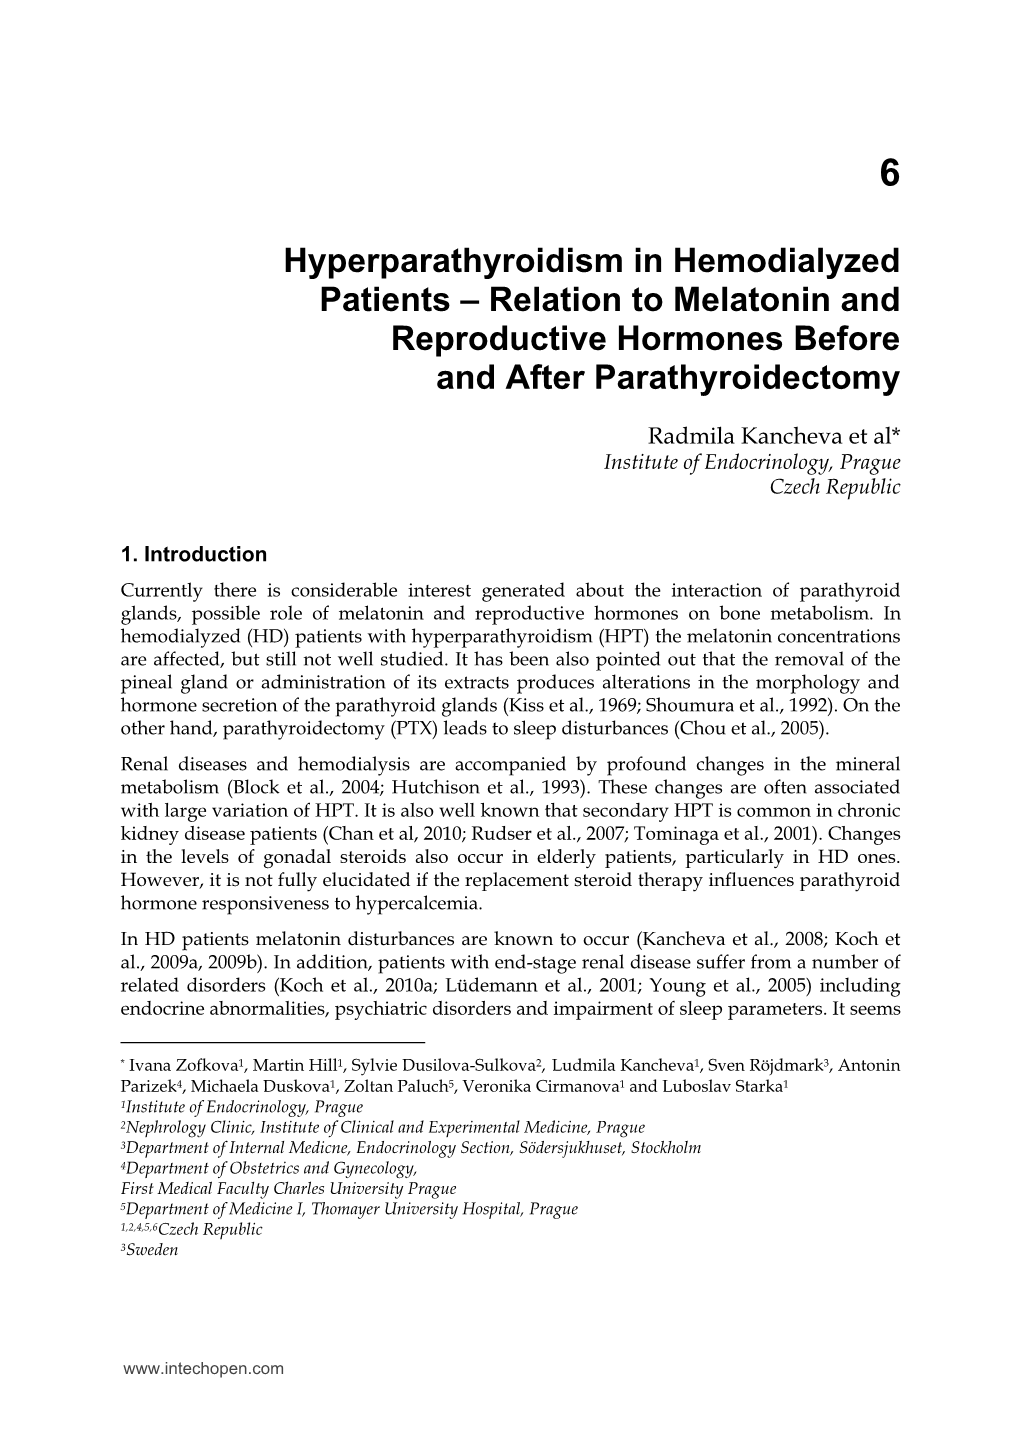 Relation to Melatonin and Reproductive Hormones Before and After Parathyroidectomy